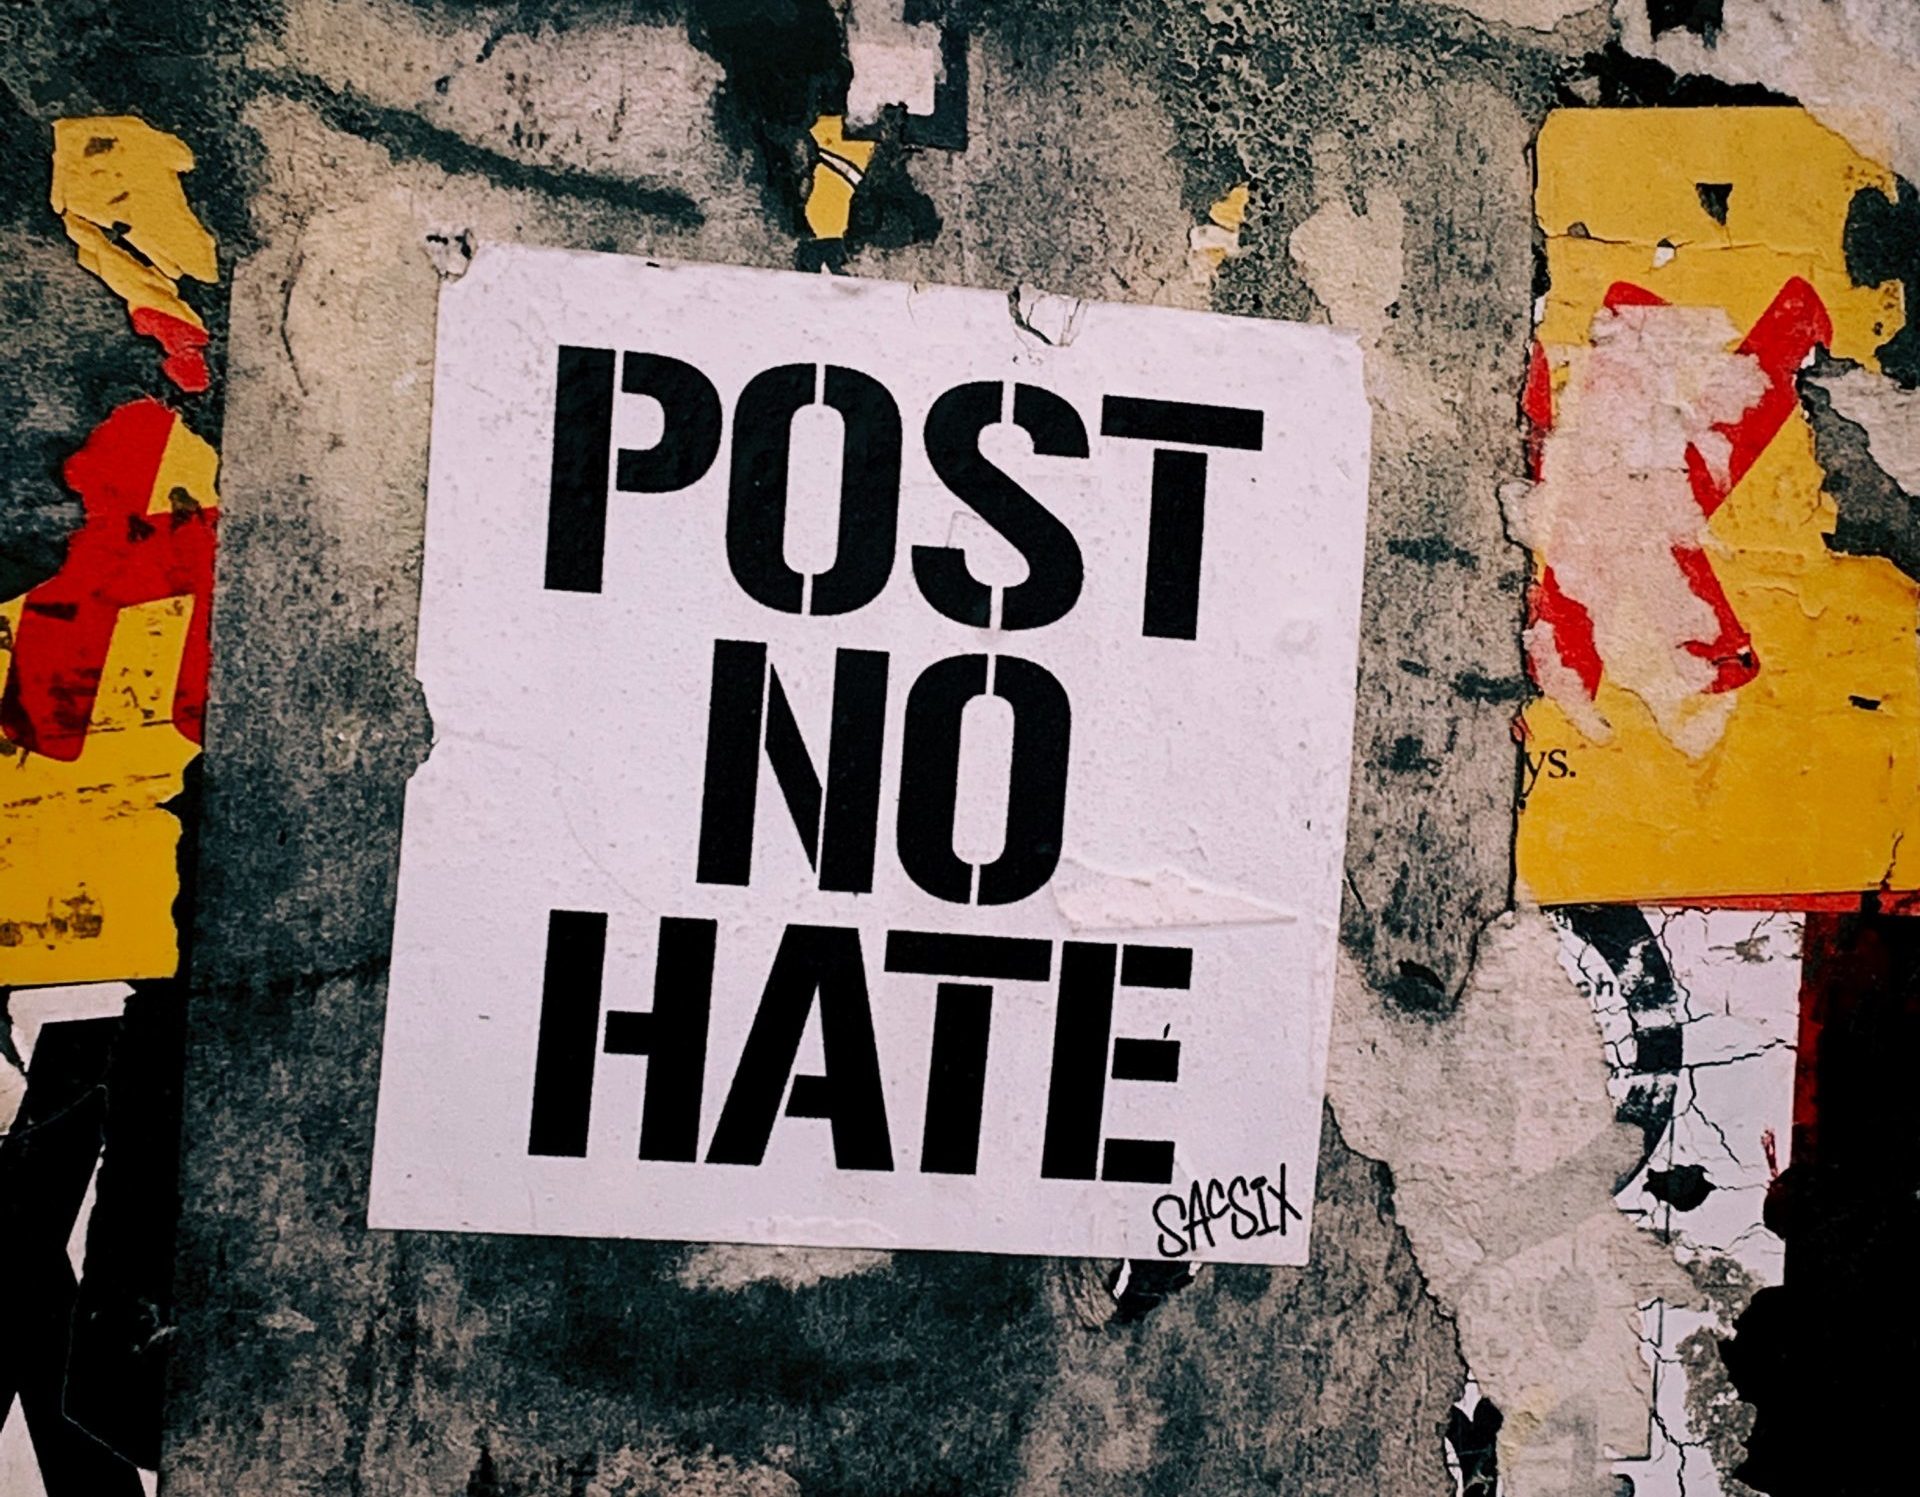 poster on wall with "Post no Hate" writing